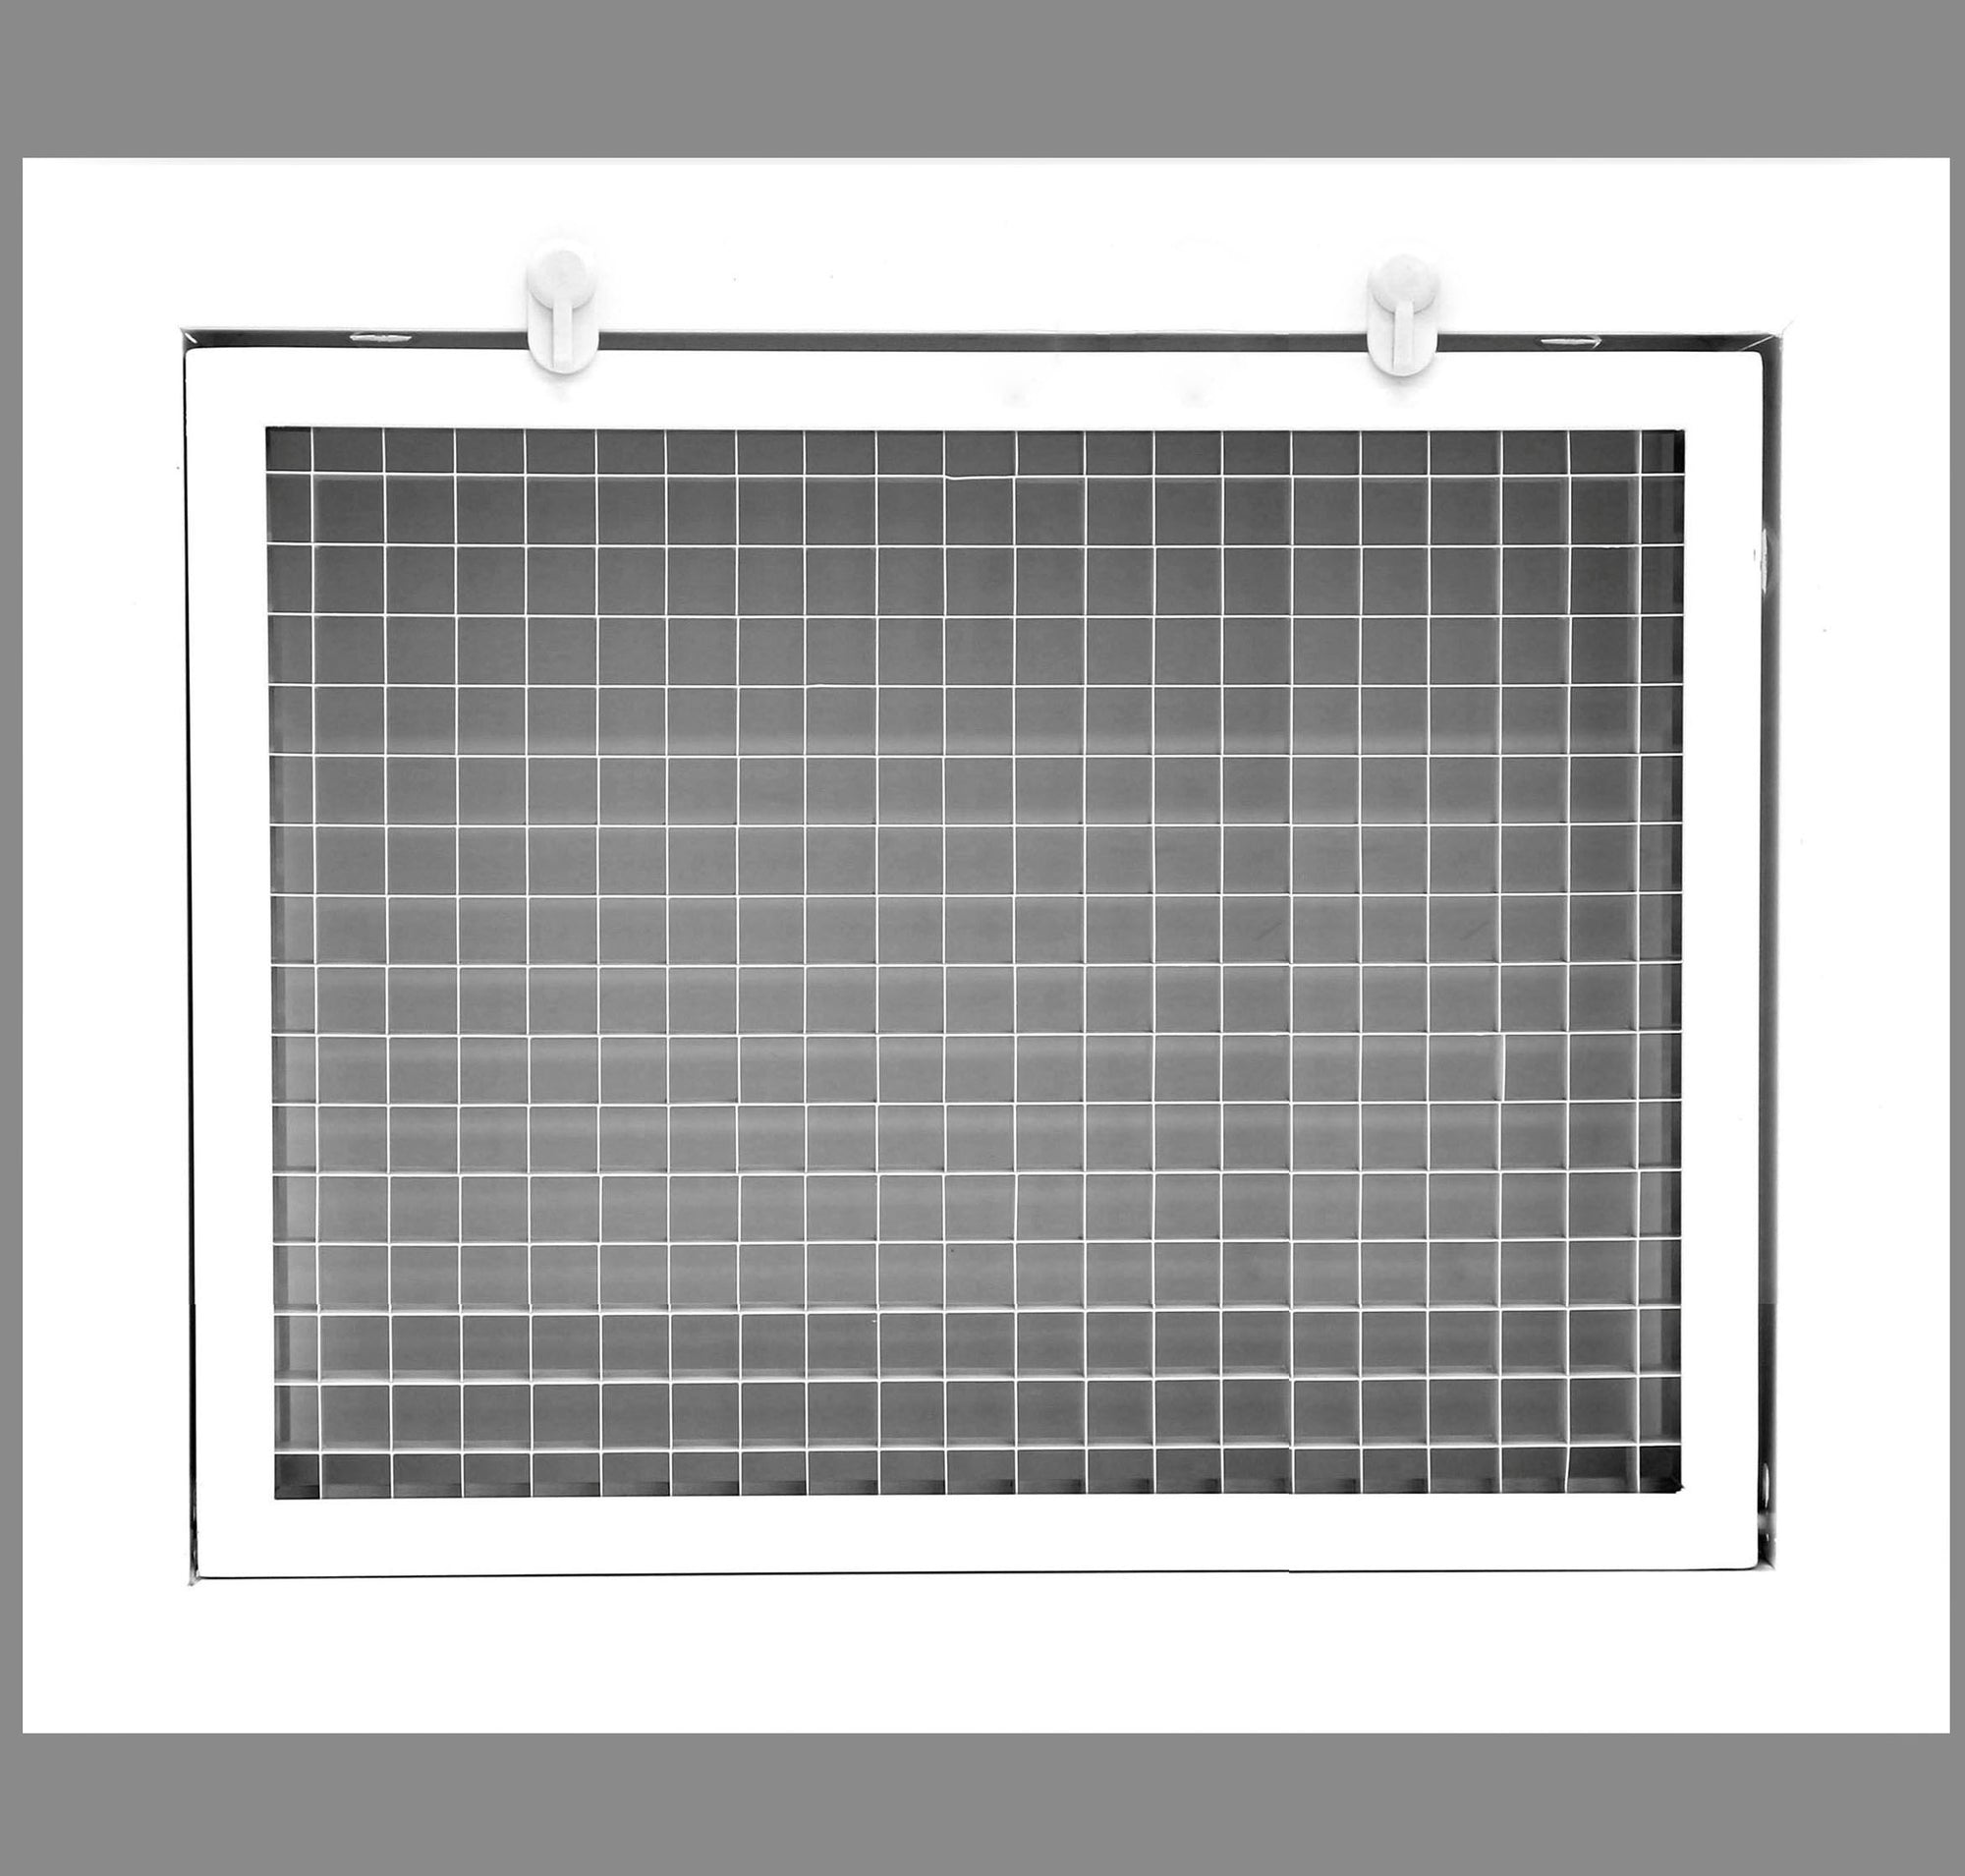 14" x 10" Cube Core Eggcrate Return Air Filter Grille for 1" Filter